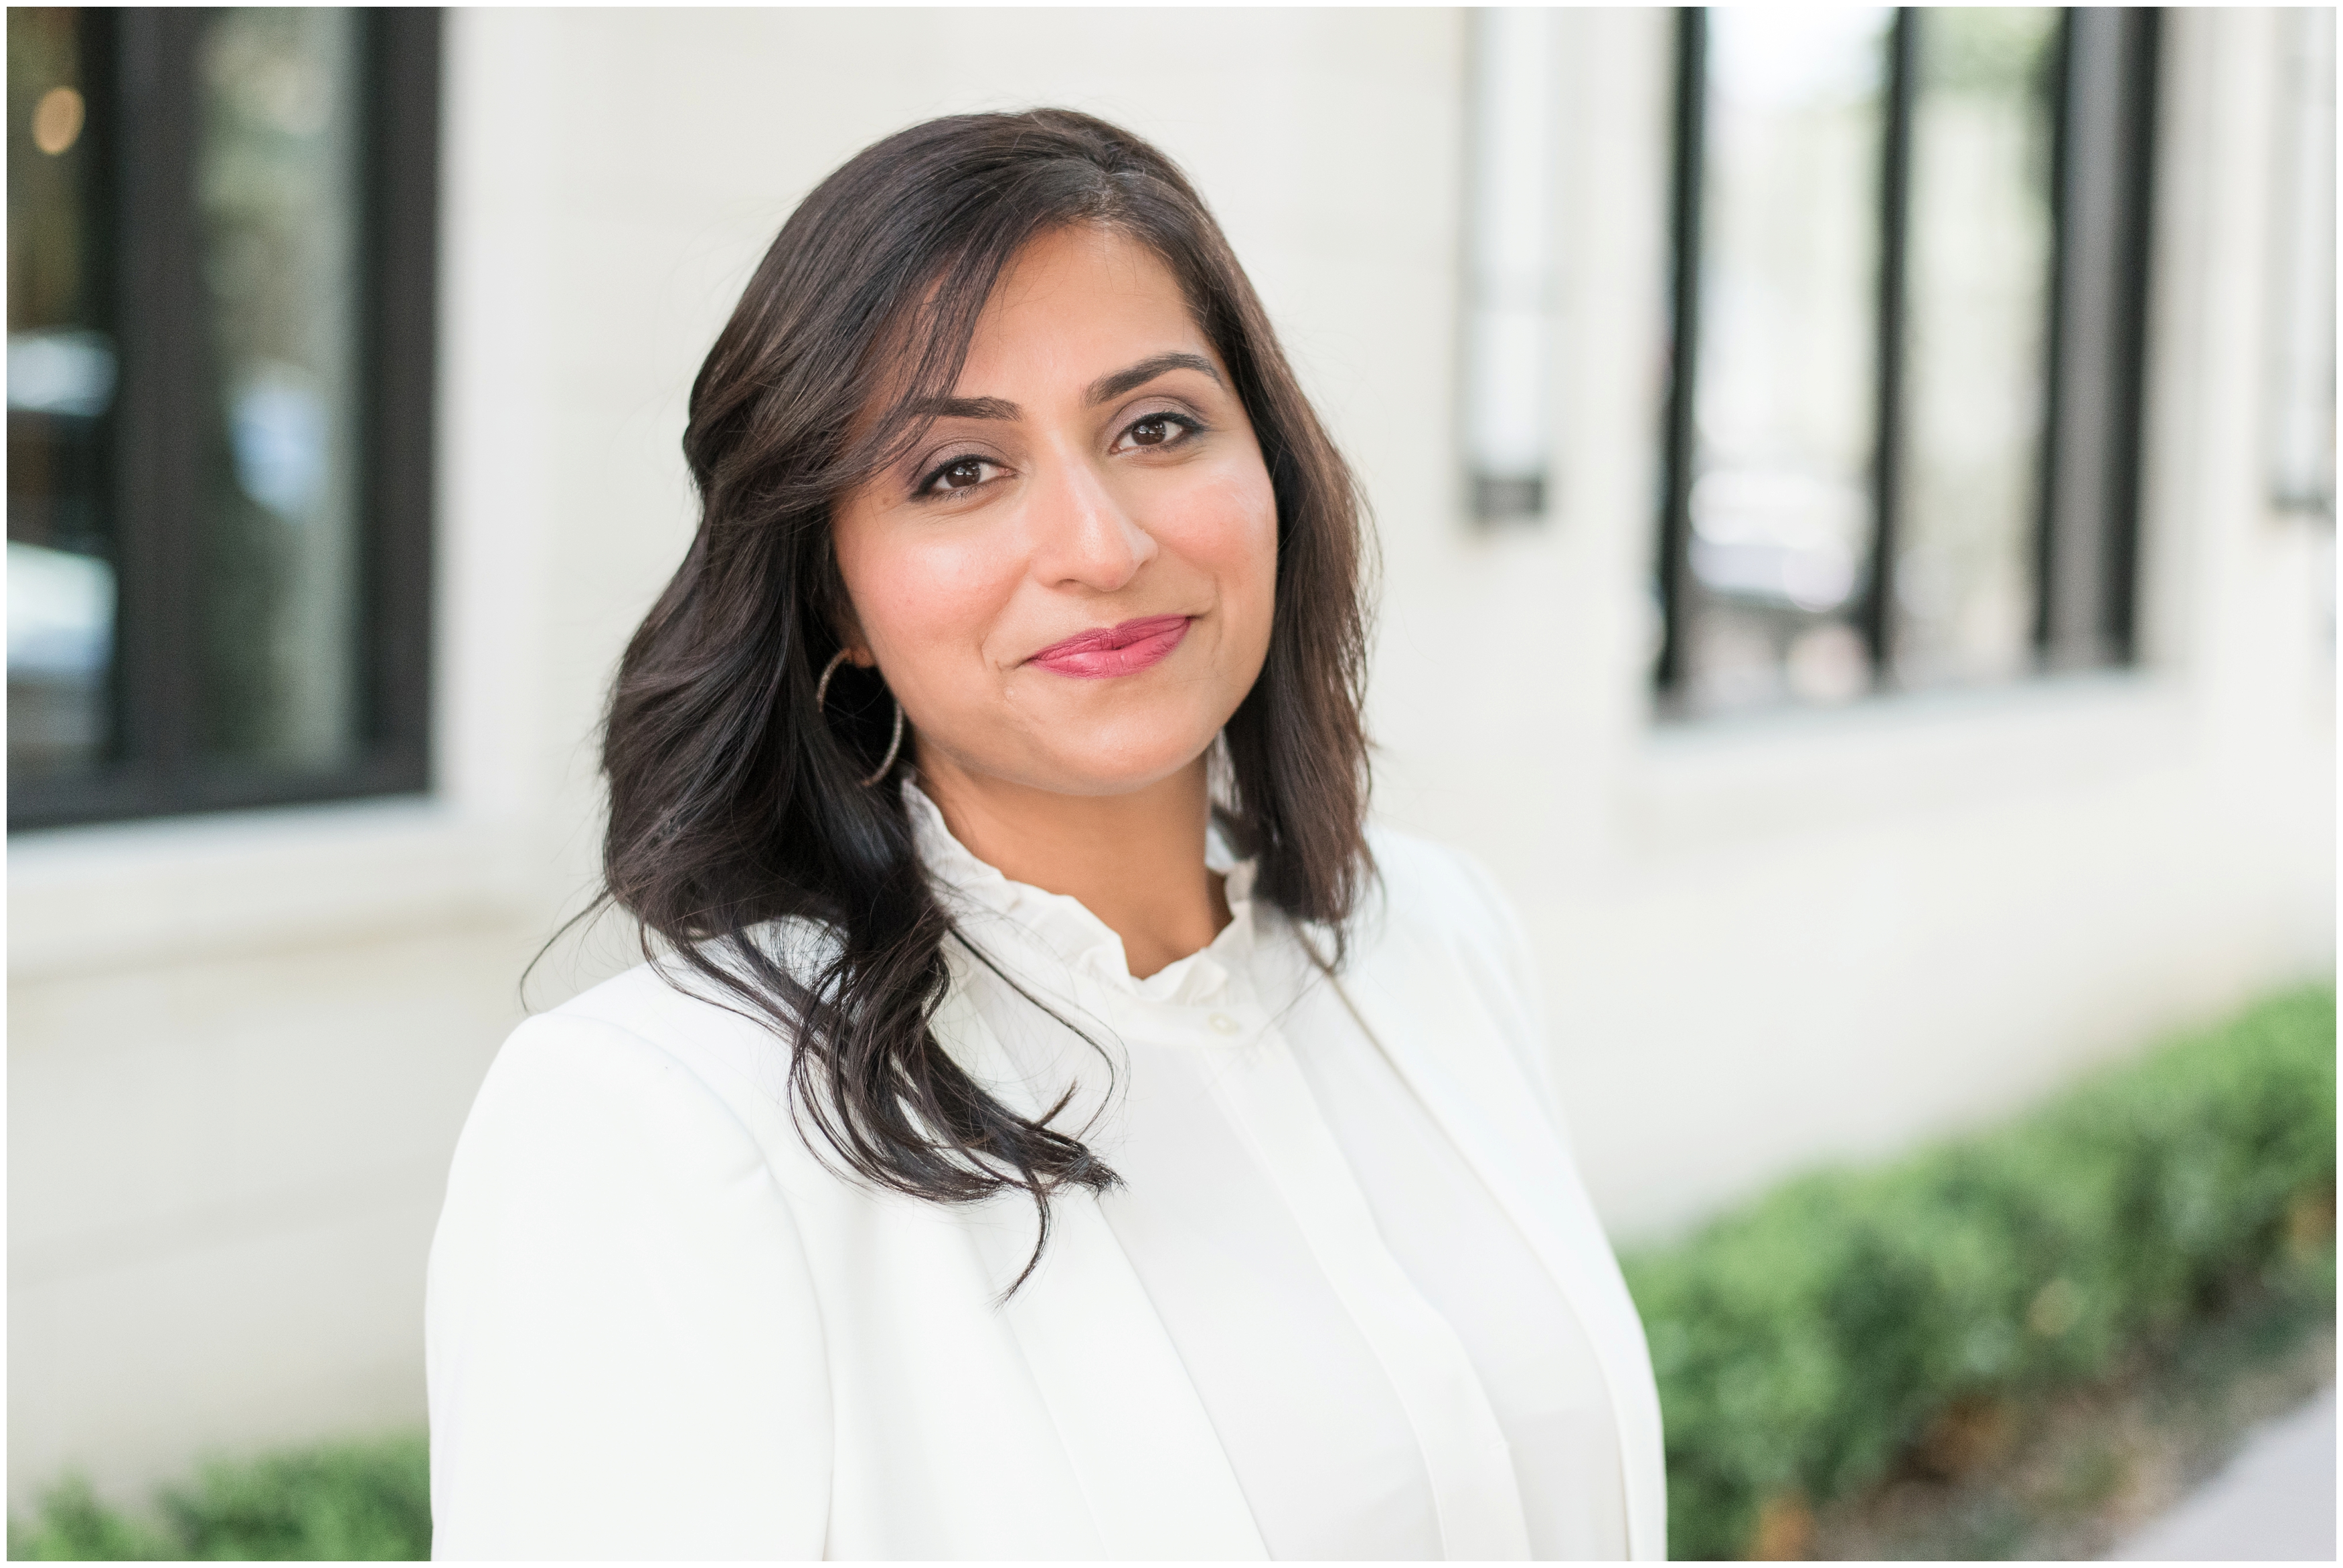 Houston brand photographer - personalized brand images for Girija Patel of GBP Law, Lawyer for Creatives